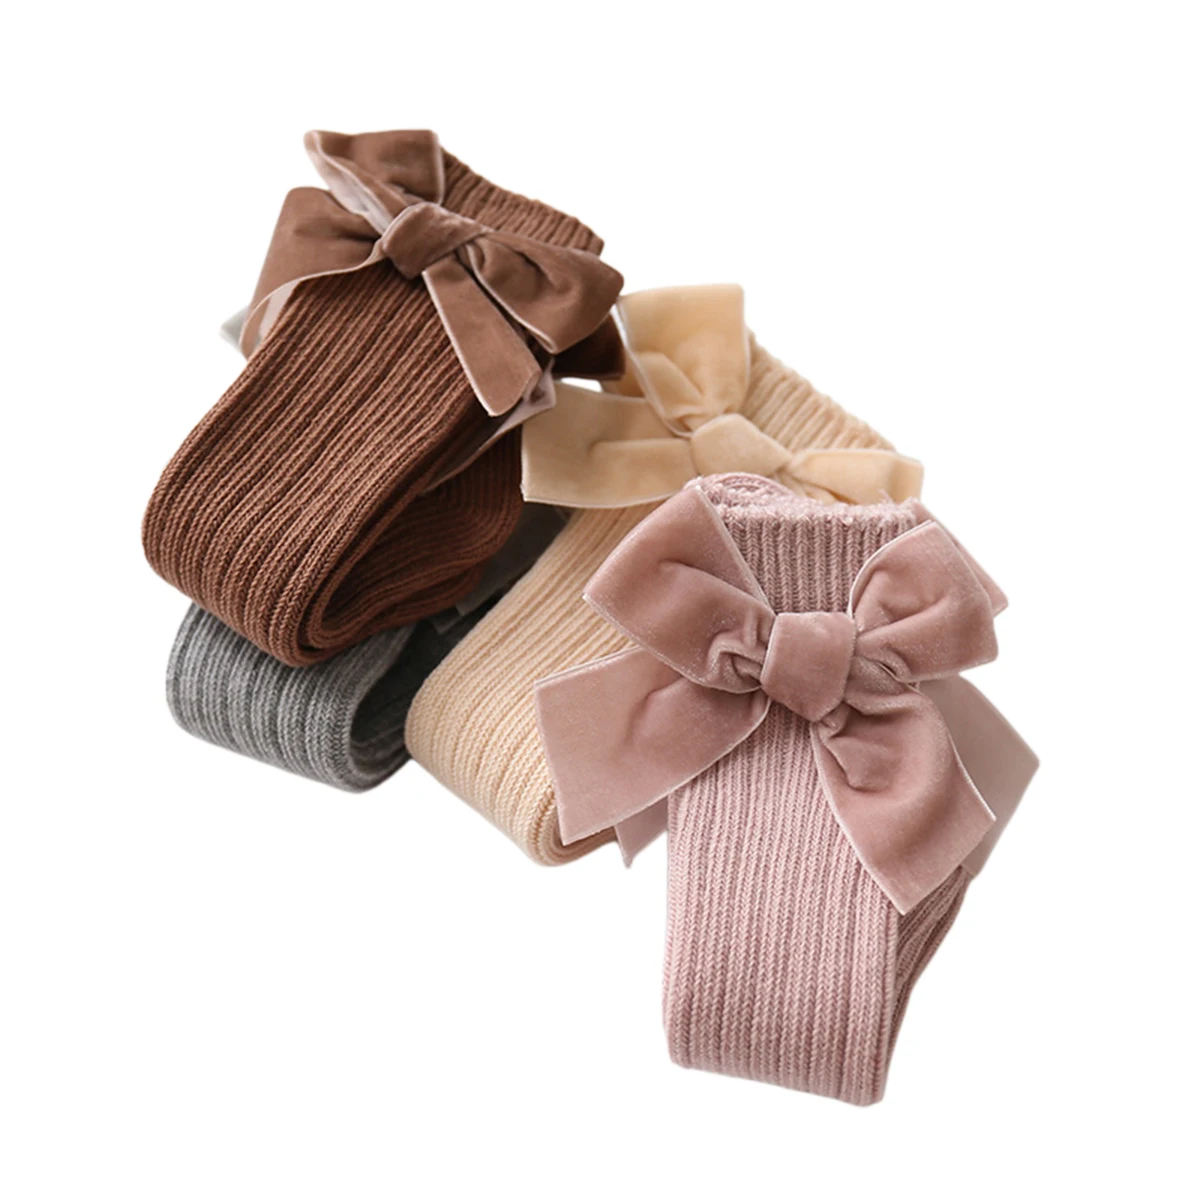 

Baby Girl Knee High Rib Stockings Winter Warm Combed Cotton Knitted Stockings with Big Velvet Bow for Infants Toddlers 1-3Years